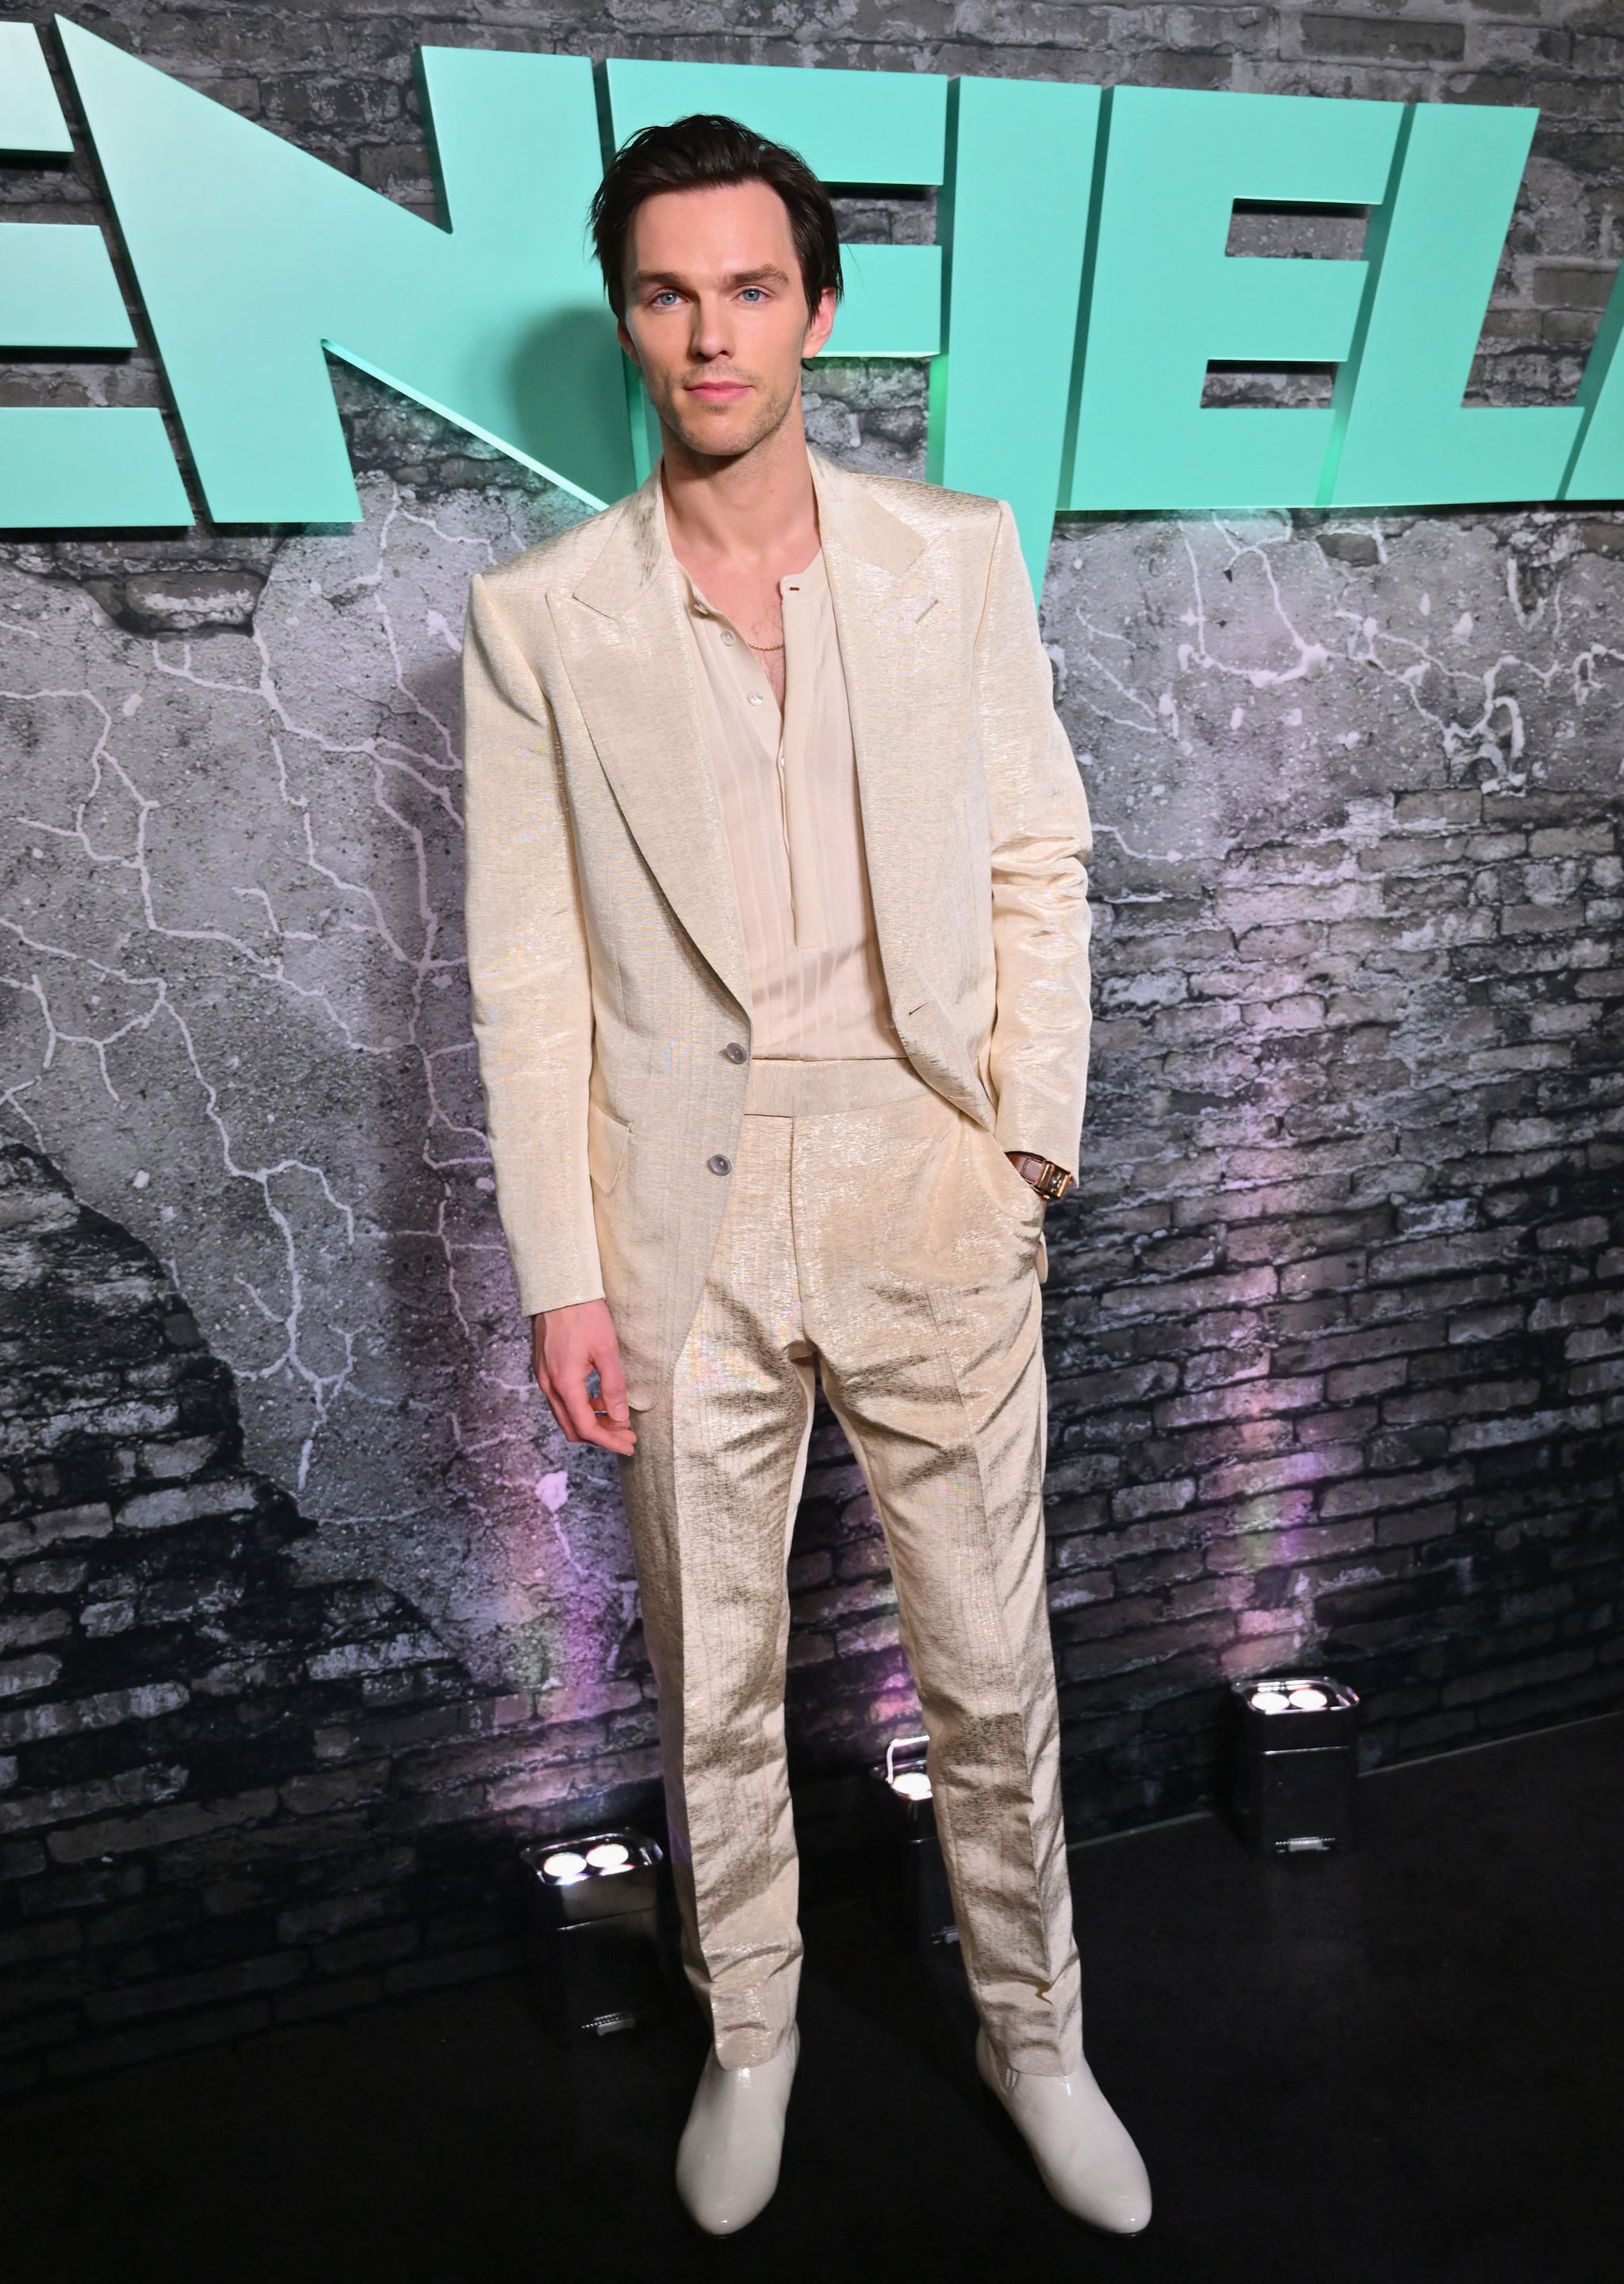 English actor Nicholas Hoult attends the premiere of 